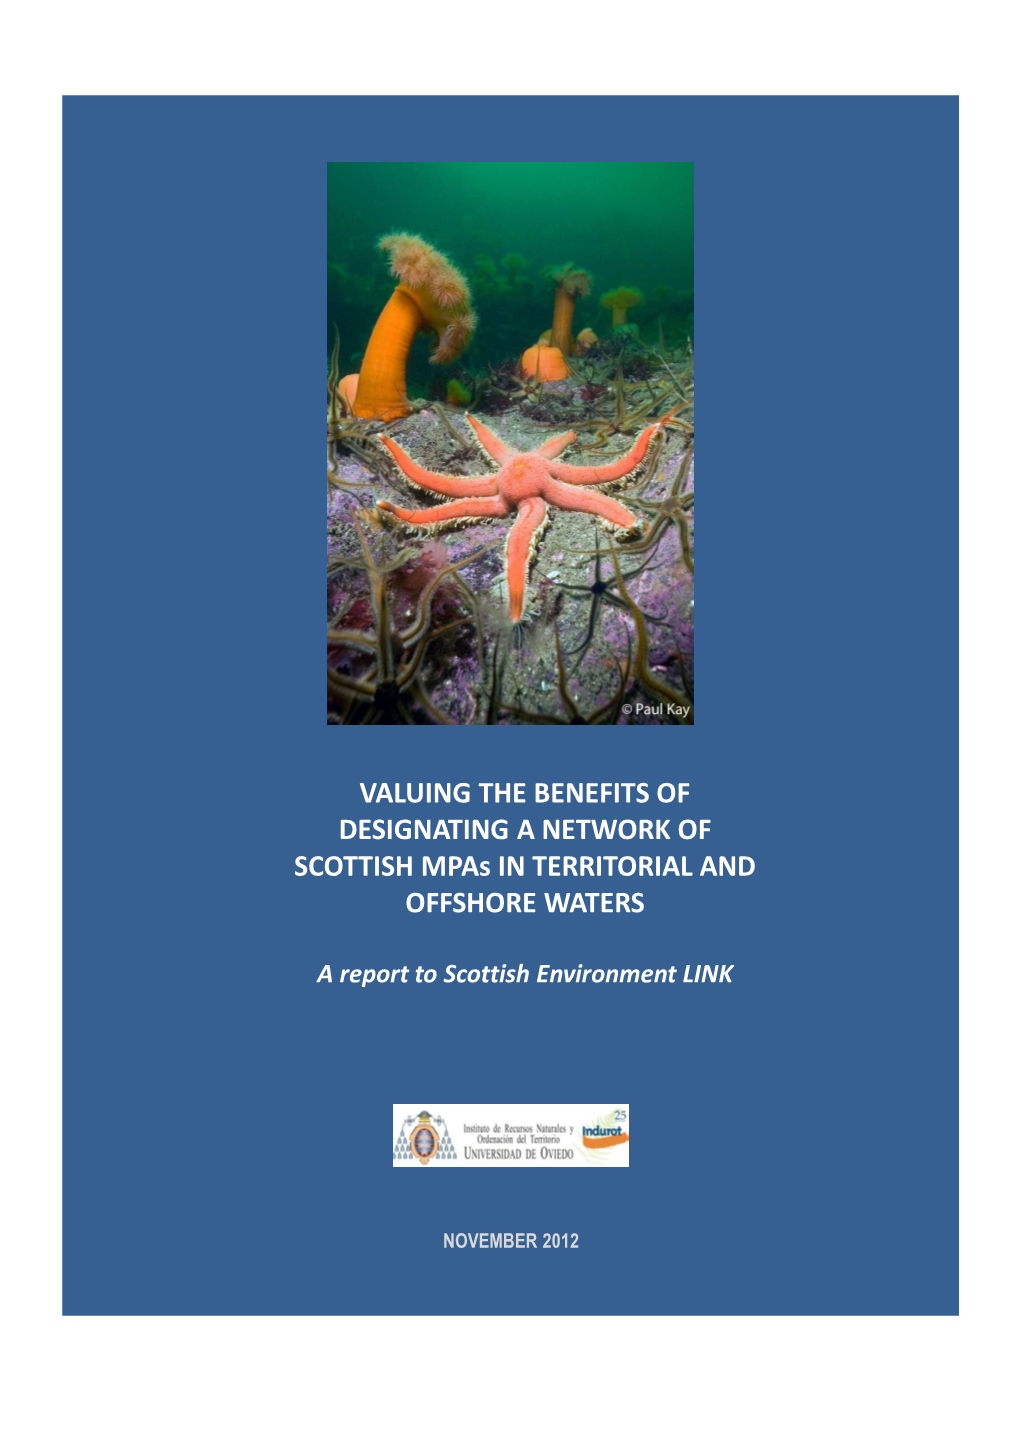 Valuing the Benefits of Designating a Scottish Network of Mpas In